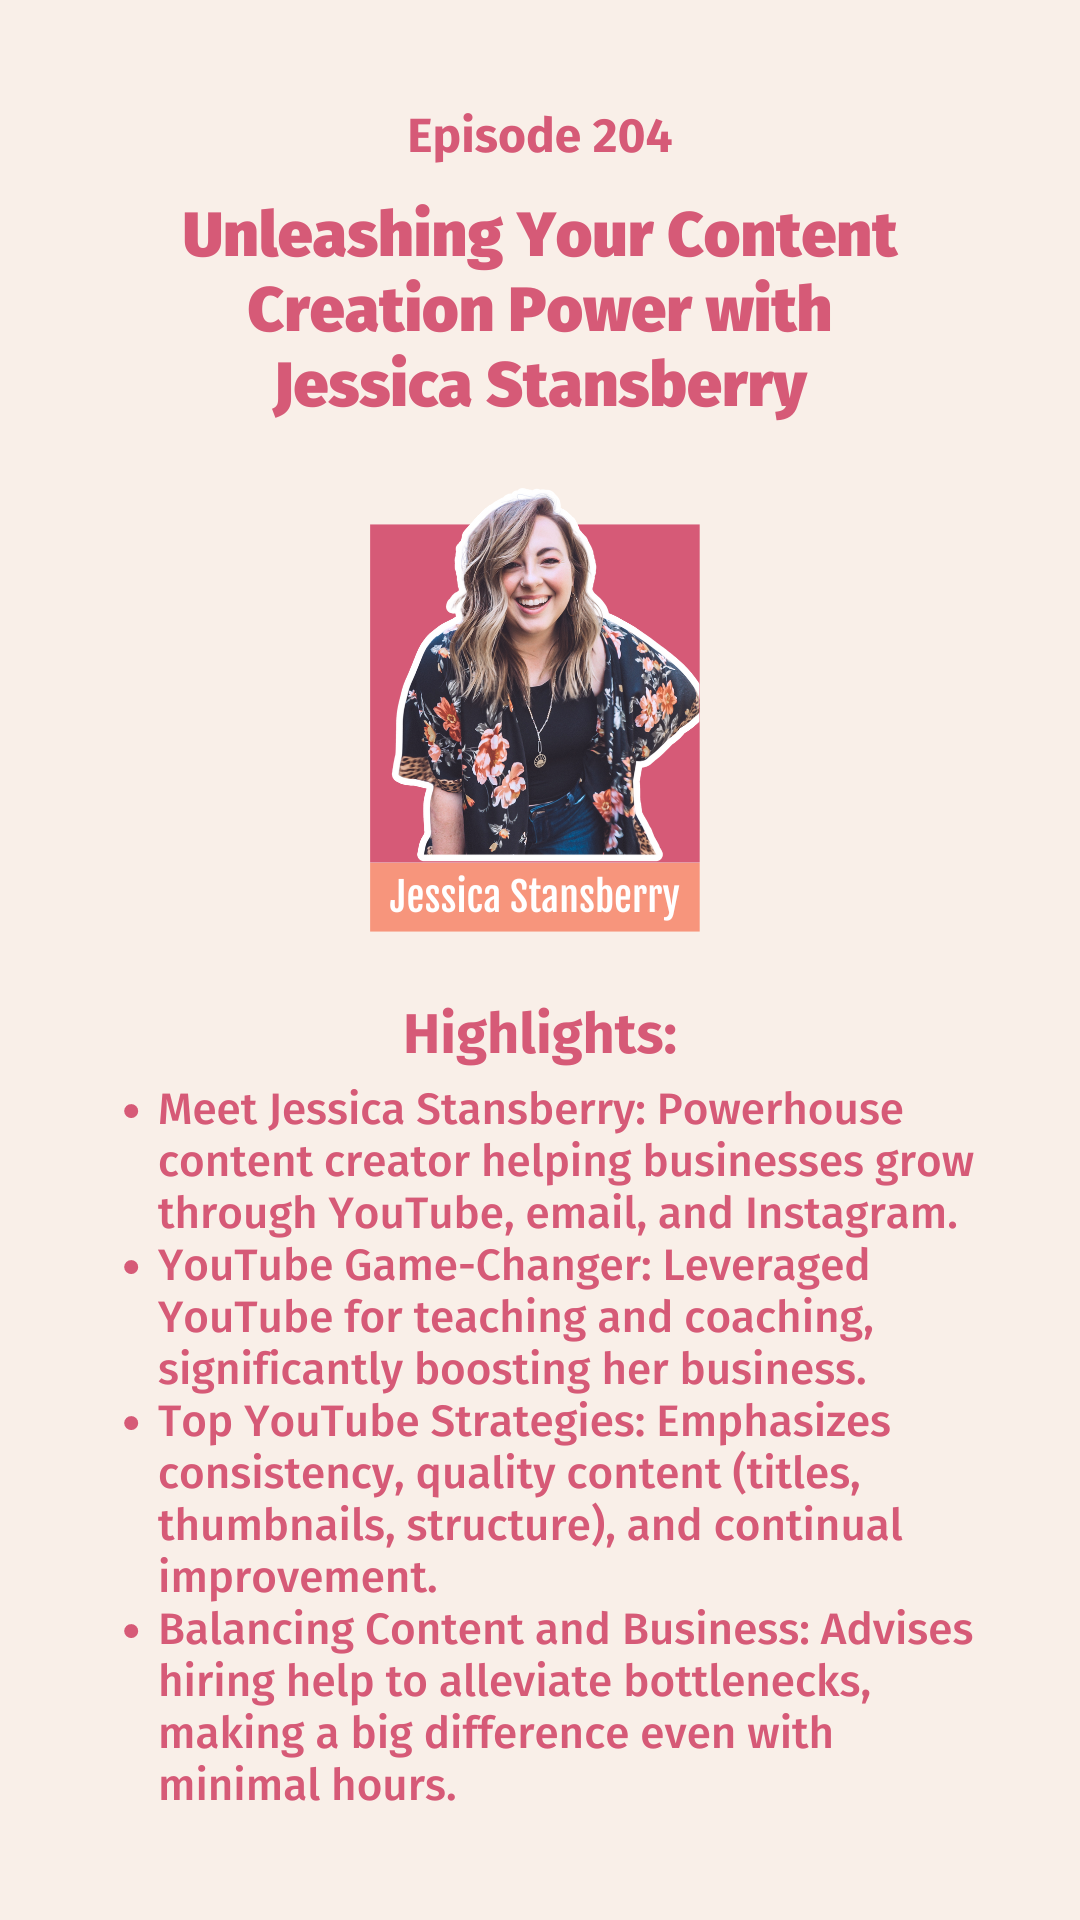 Unleash your content creation power with Jessica Stansberry! Discover her inspiring journey, YouTube growth strategies, and tips on balancing business and content creation in this must-read blog.